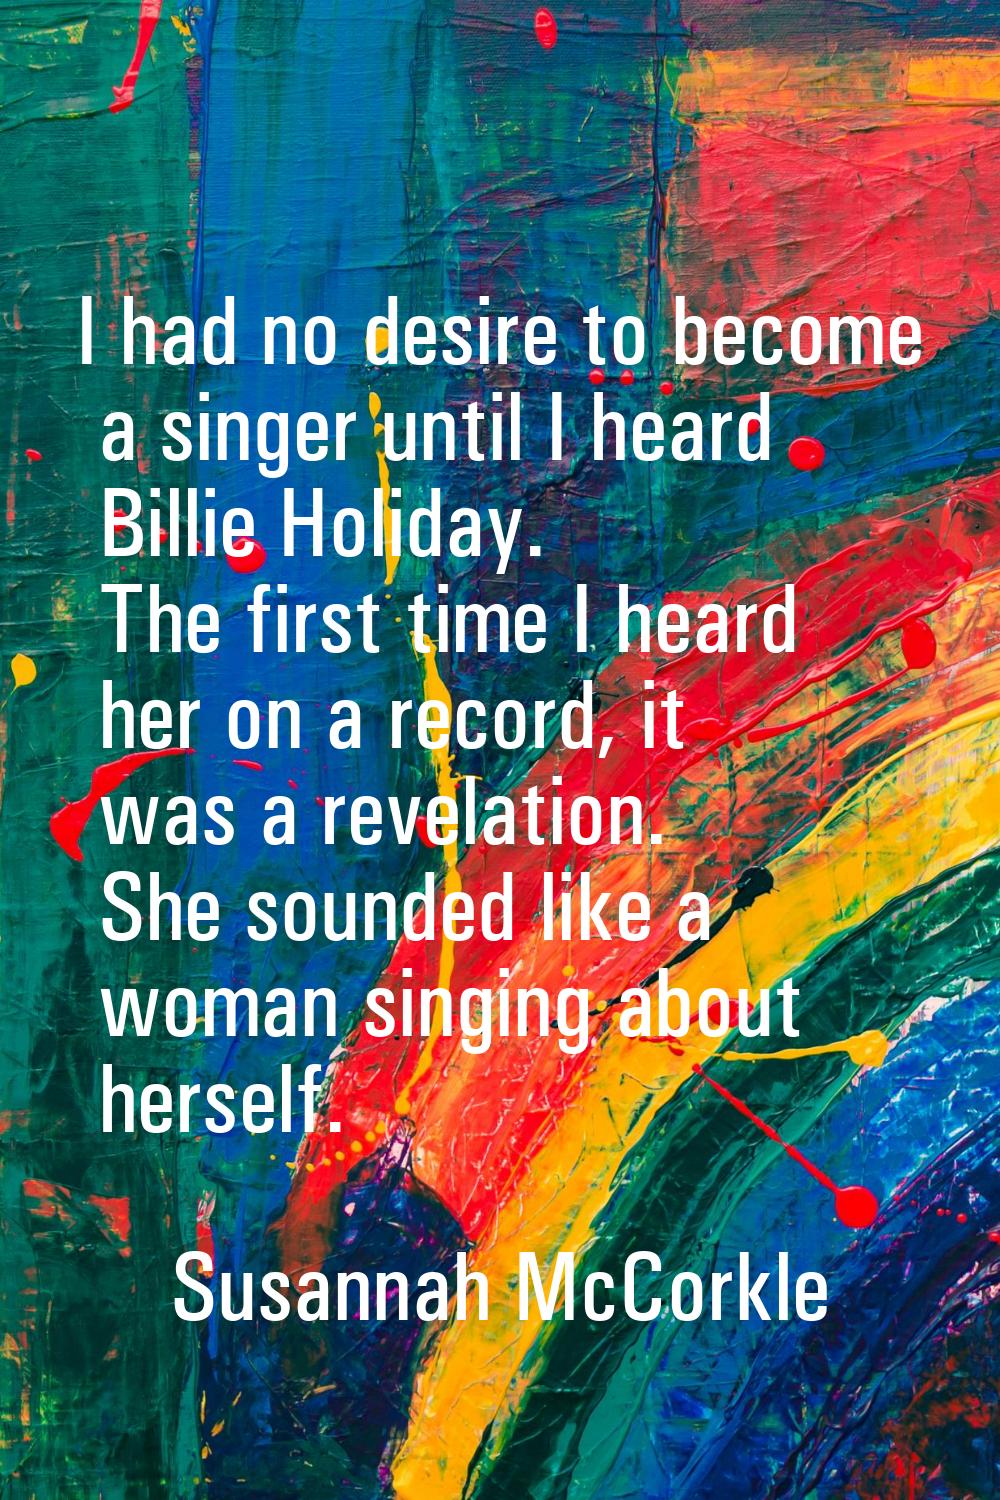 I had no desire to become a singer until I heard Billie Holiday. The first time I heard her on a re